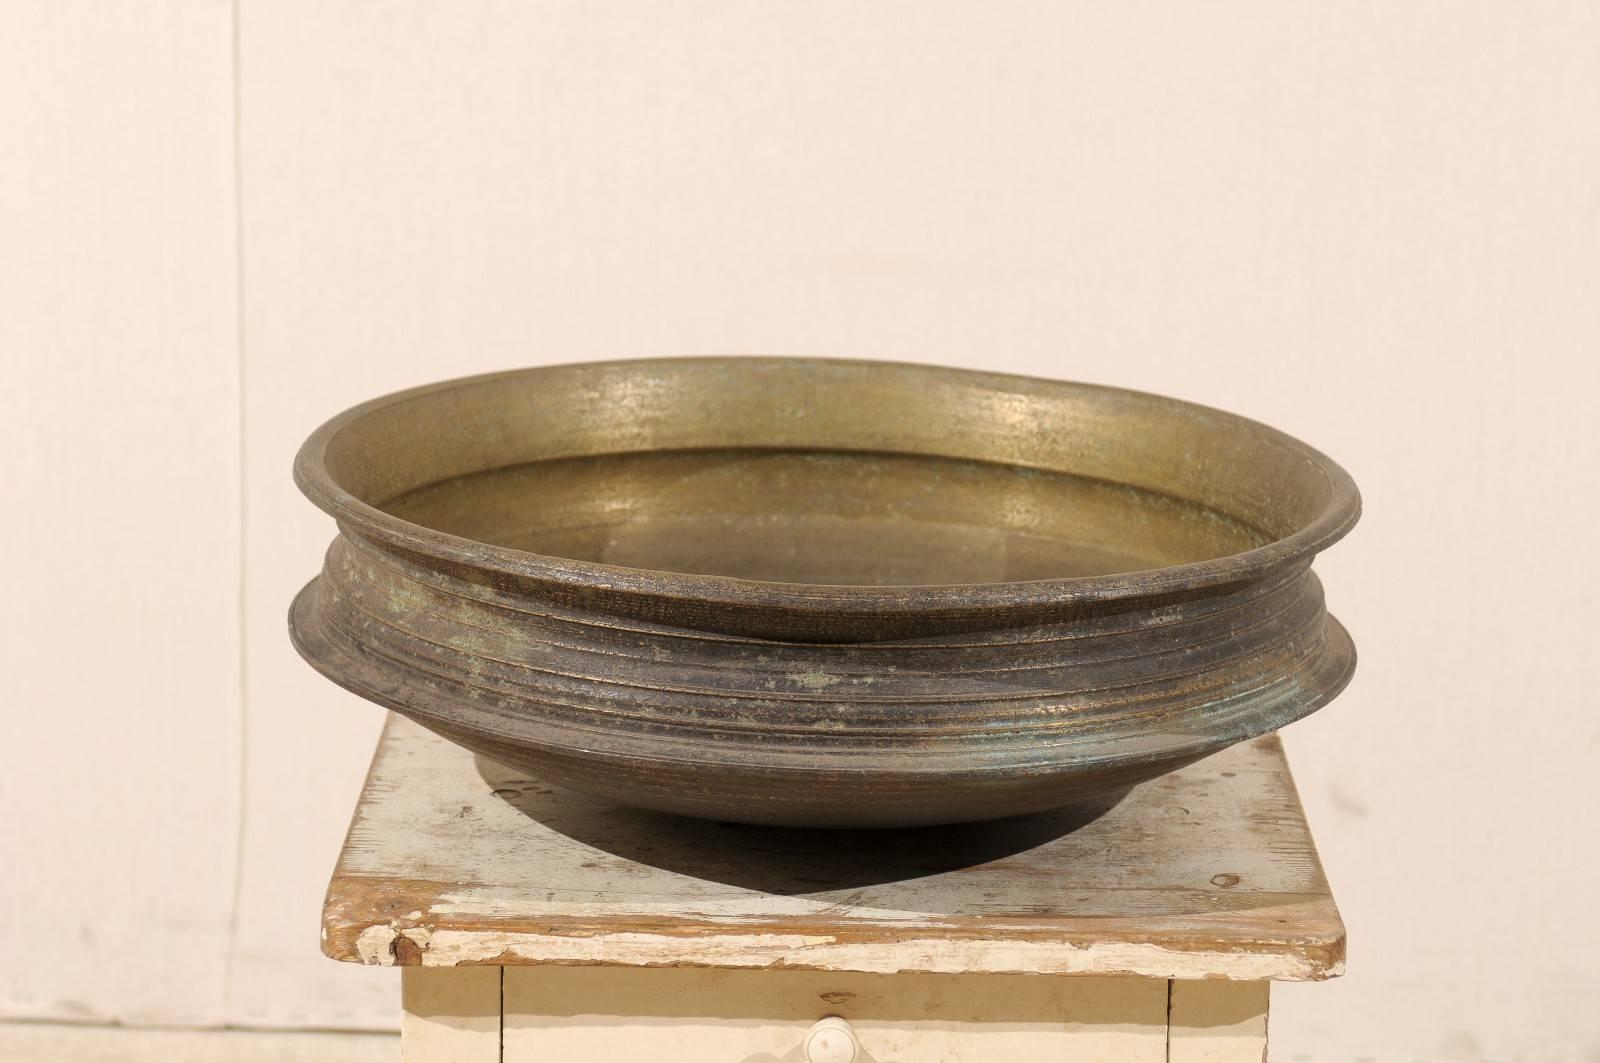 An Uruli vessel from Southern India. This uruli, from the early 20th century, is made of bell metal. Urulis are vessels which are circular in shape and shallow in depth, and were typically used in traditional cookware extensively used in southern